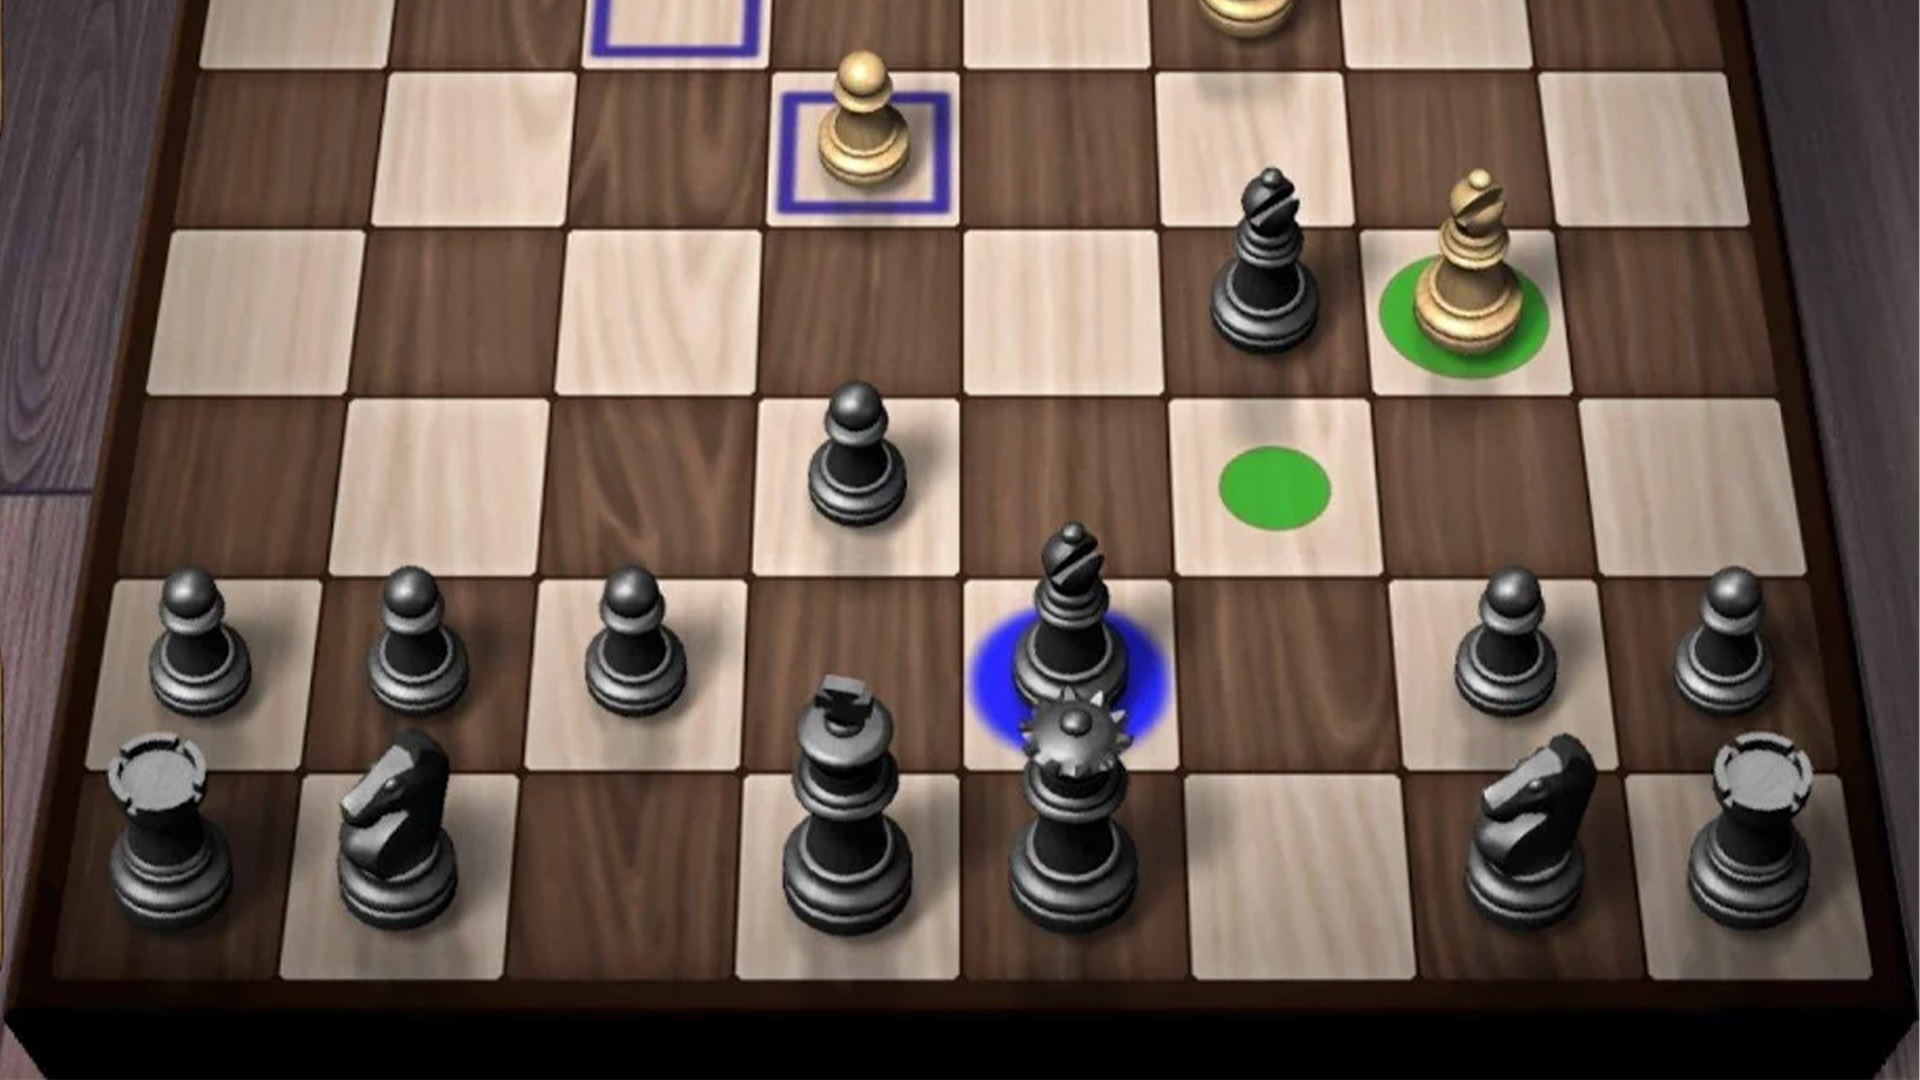 Chess Openings Pró-Master – Apps no Google Play